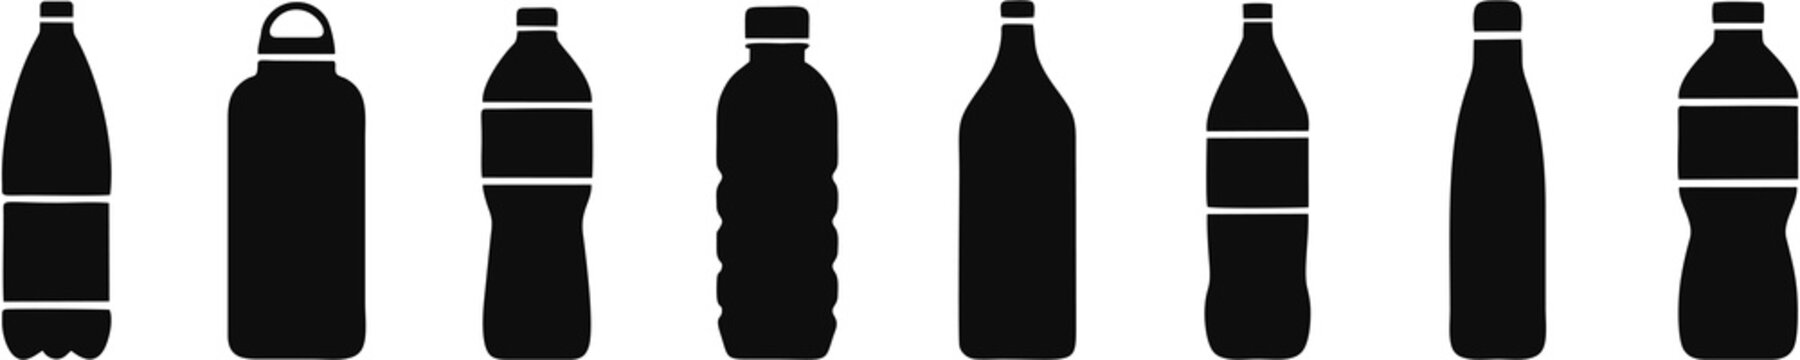 Water bottle icon set. plastic bottle icon symbol sign collections, vector illustration